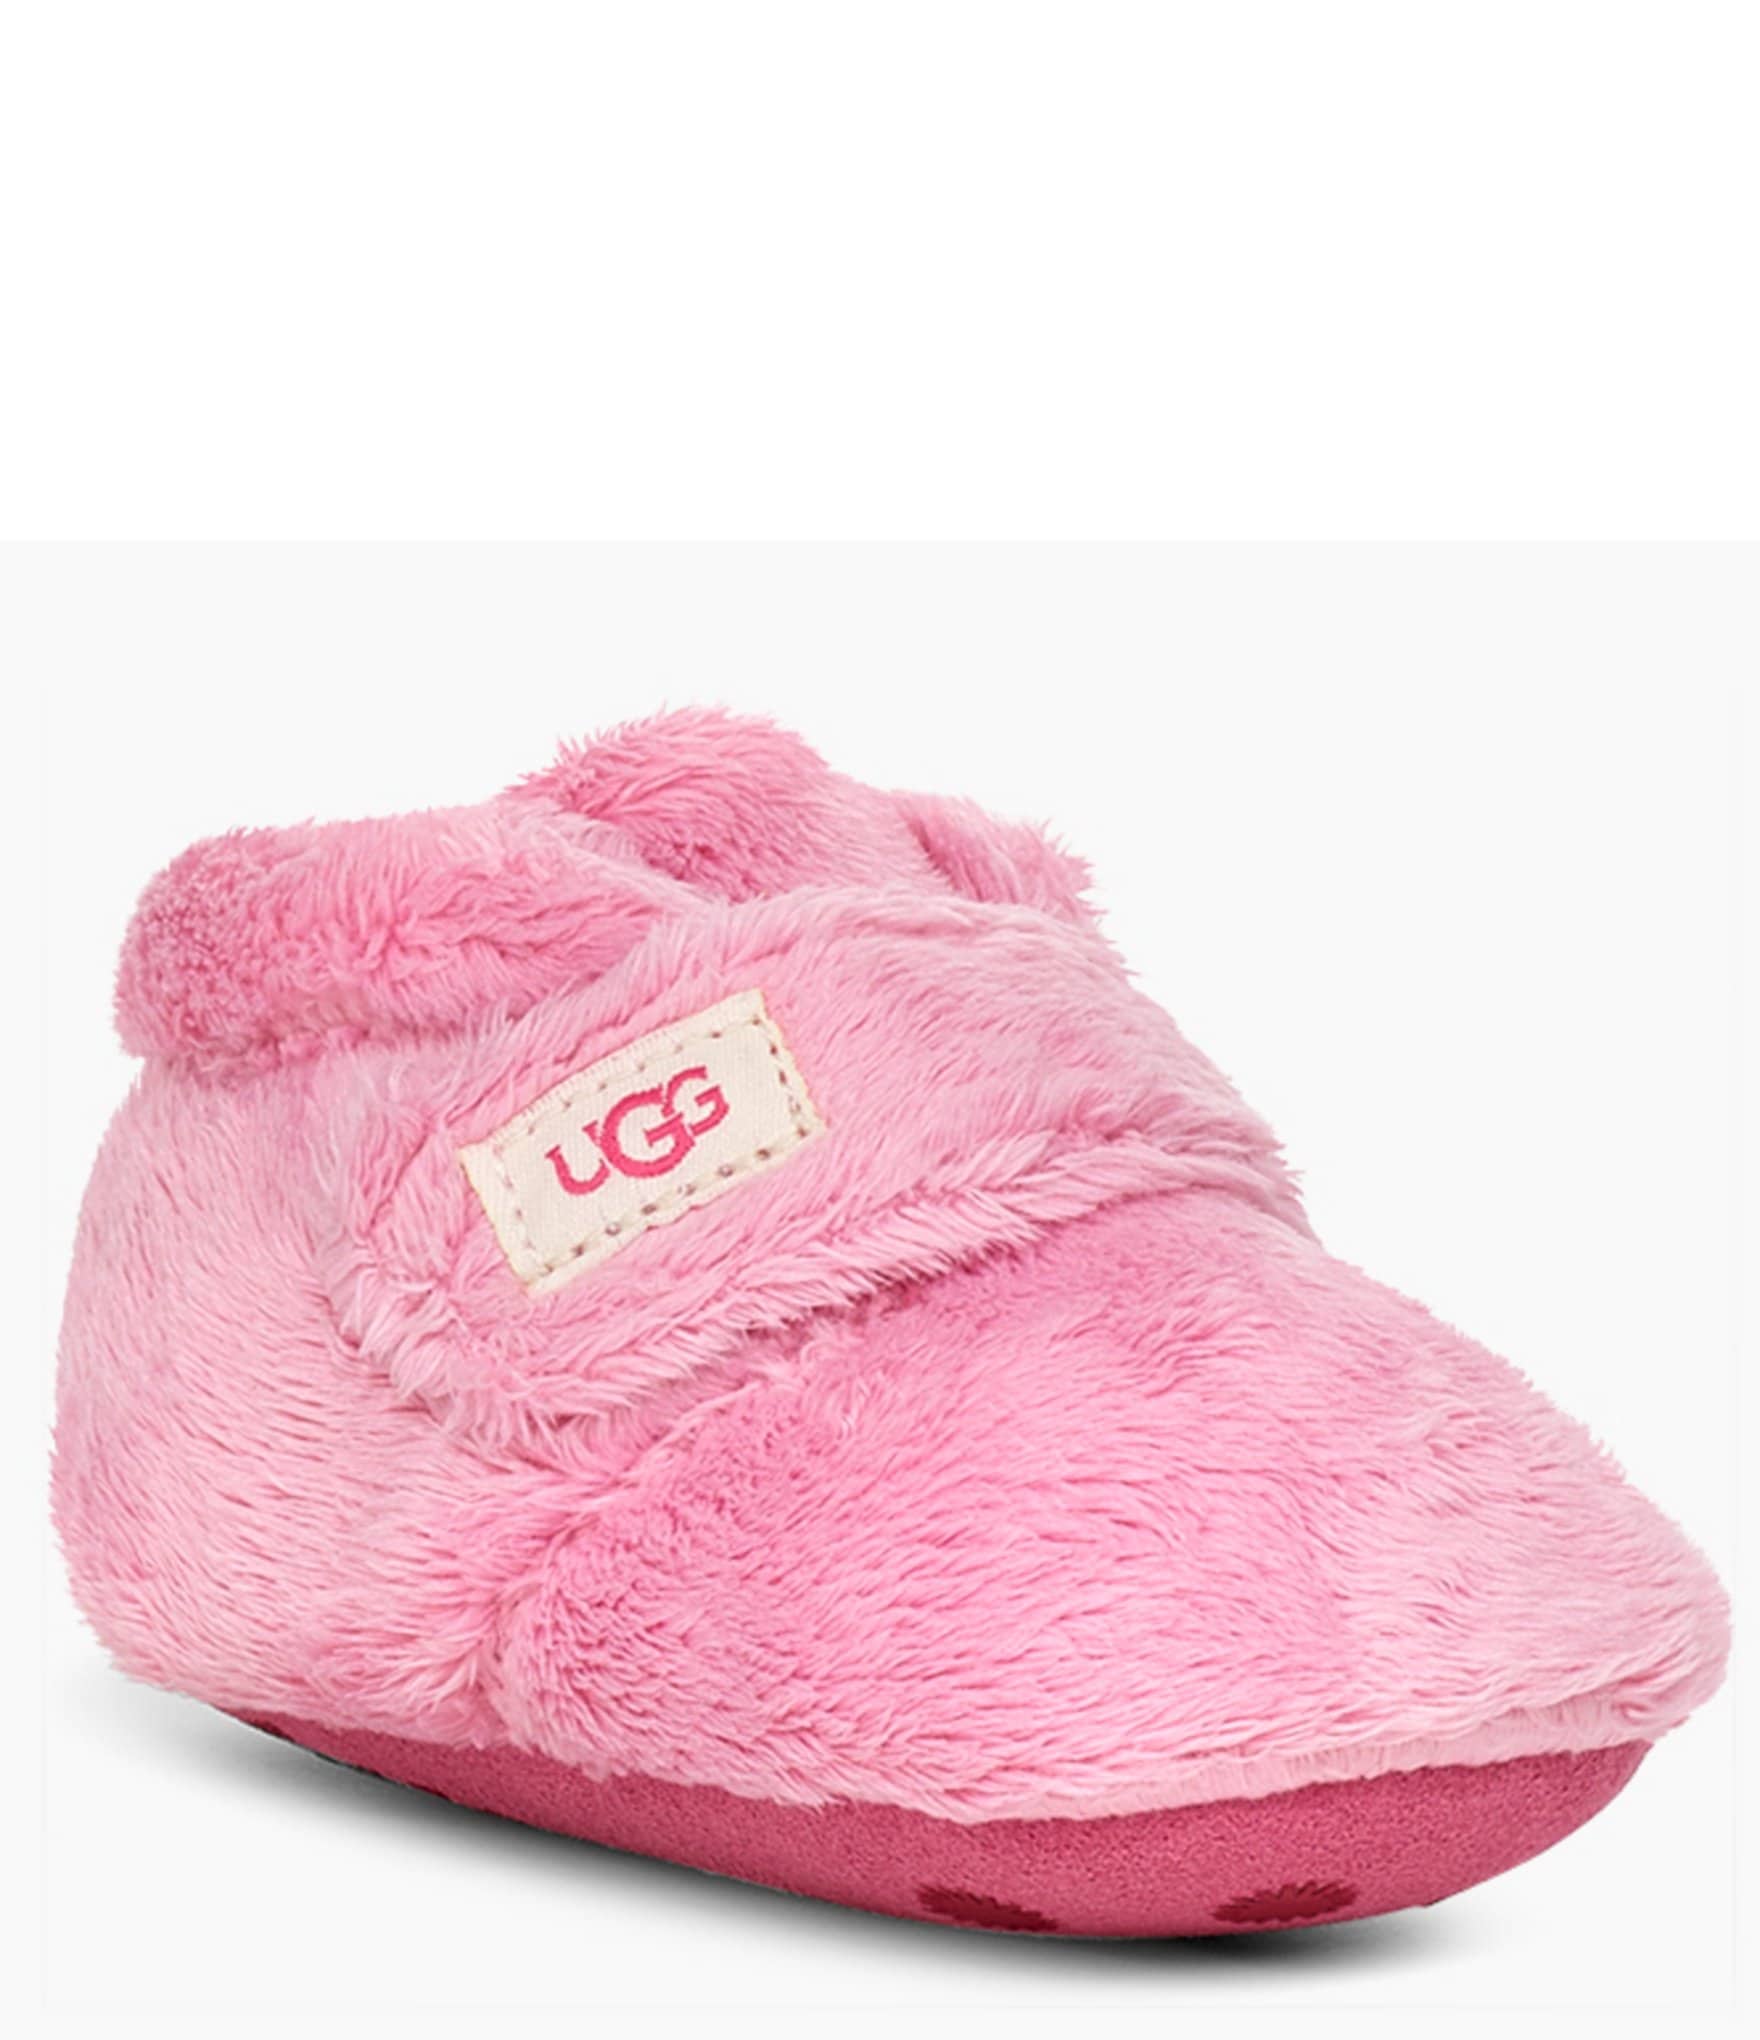 ugg shoes pink